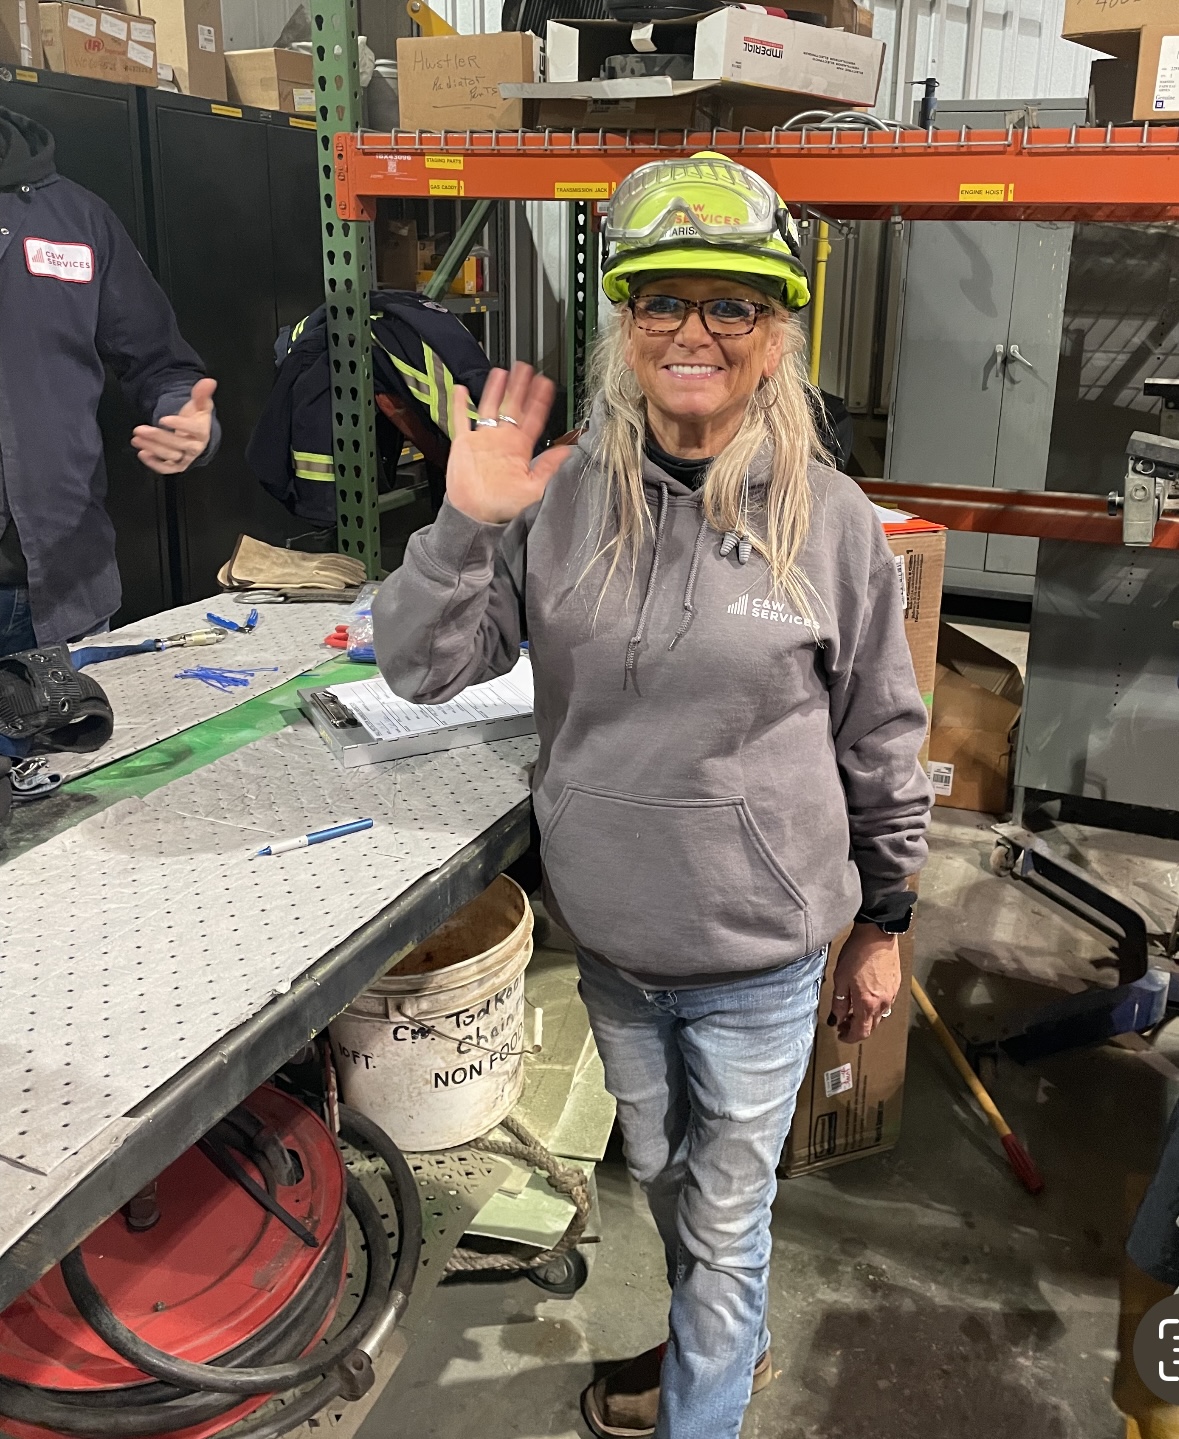 A woman in a workshop wearing a hoodie, safety goggles, and a hard hat with a headlamp is waving at the camera.